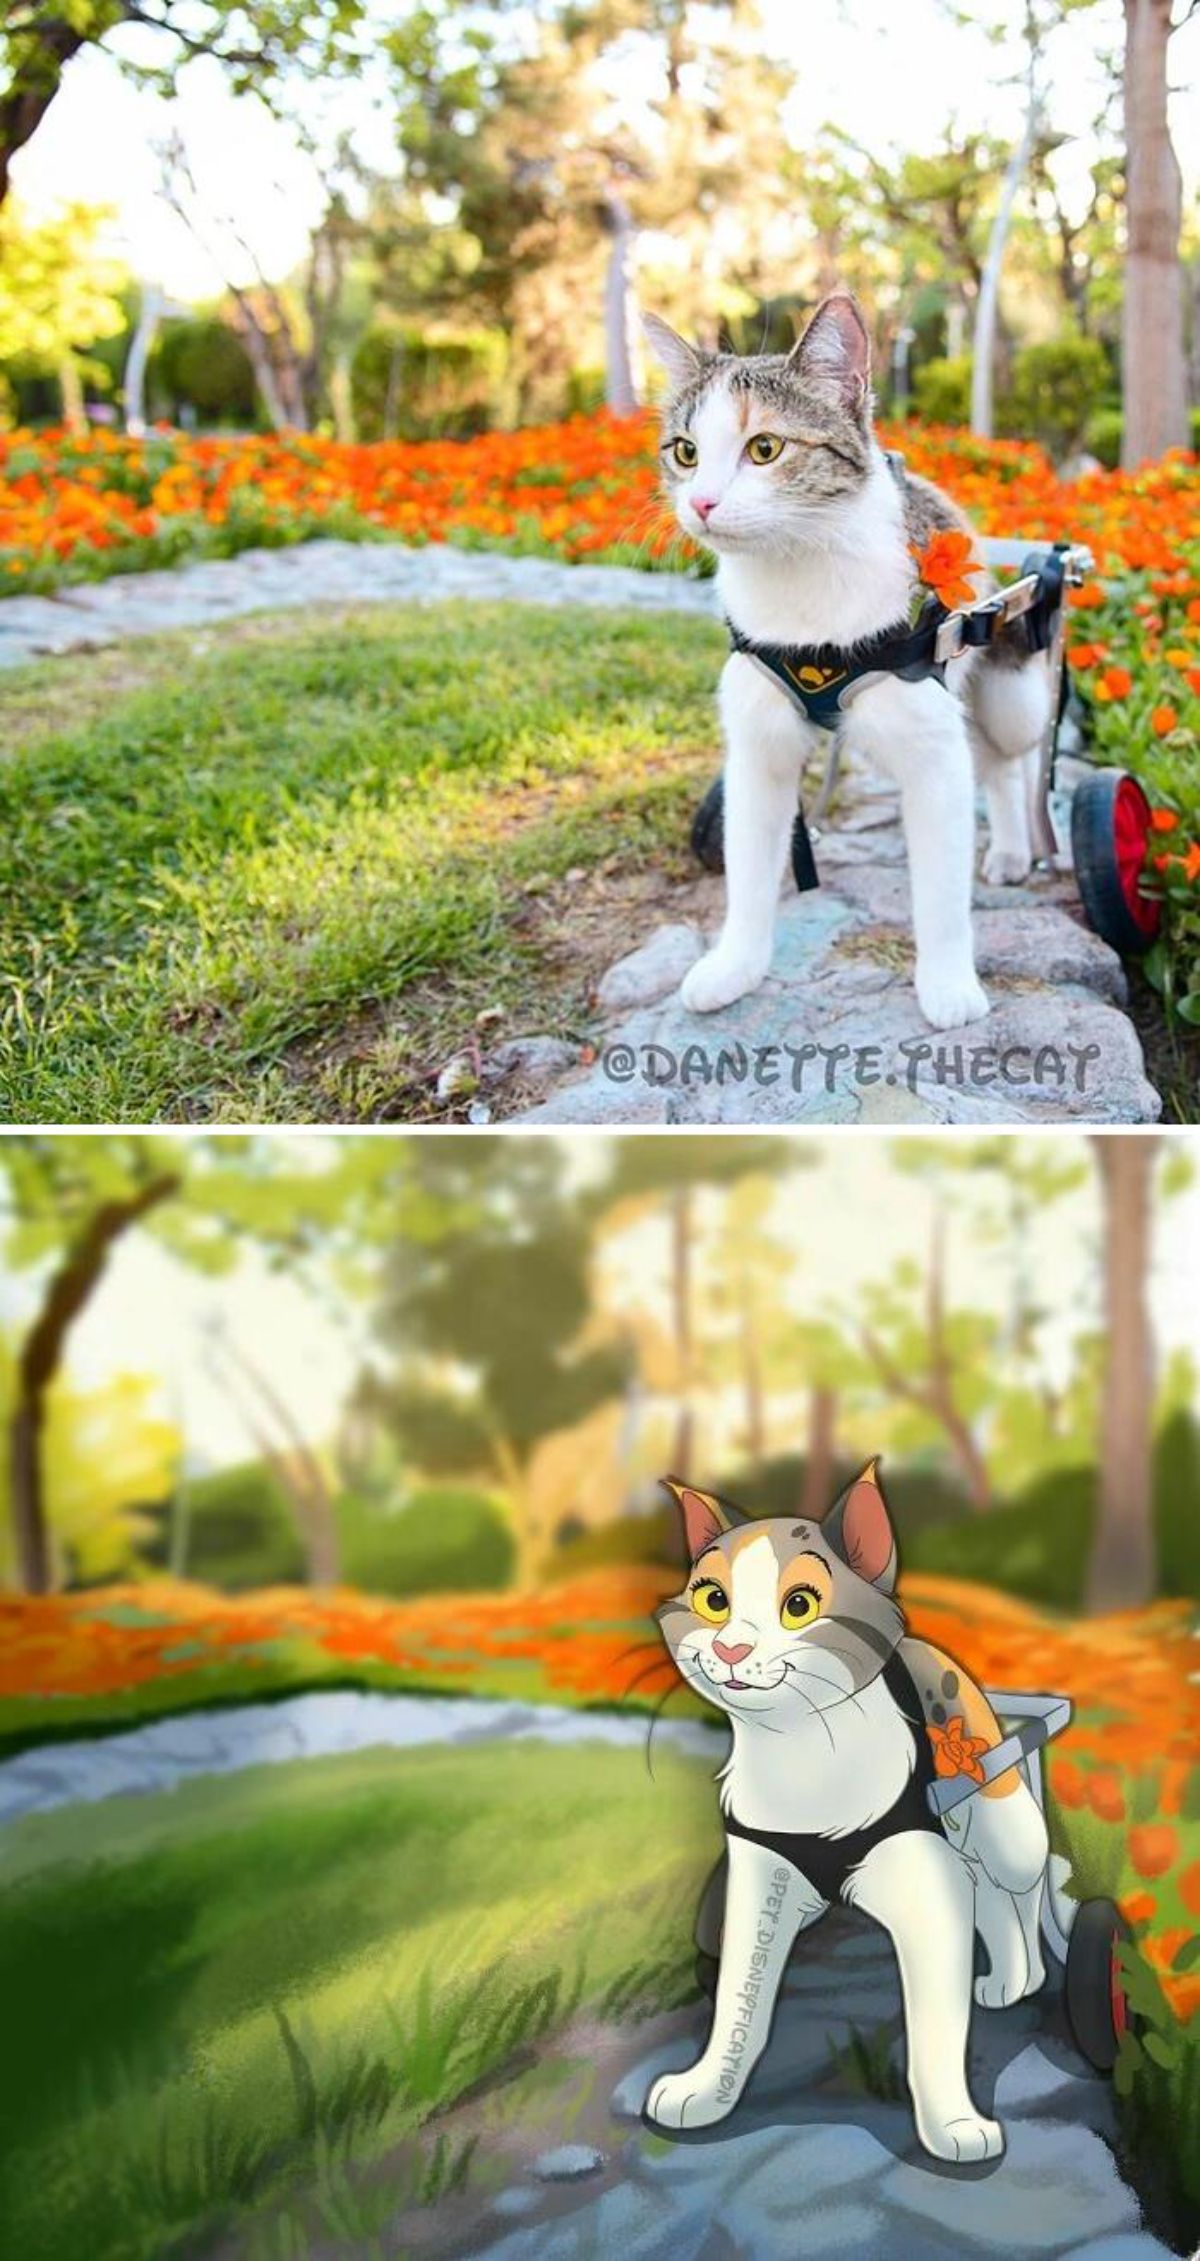 real photo and cartoon image of a brown and white tabby cat using a wheel legsstanding on a rock in a park